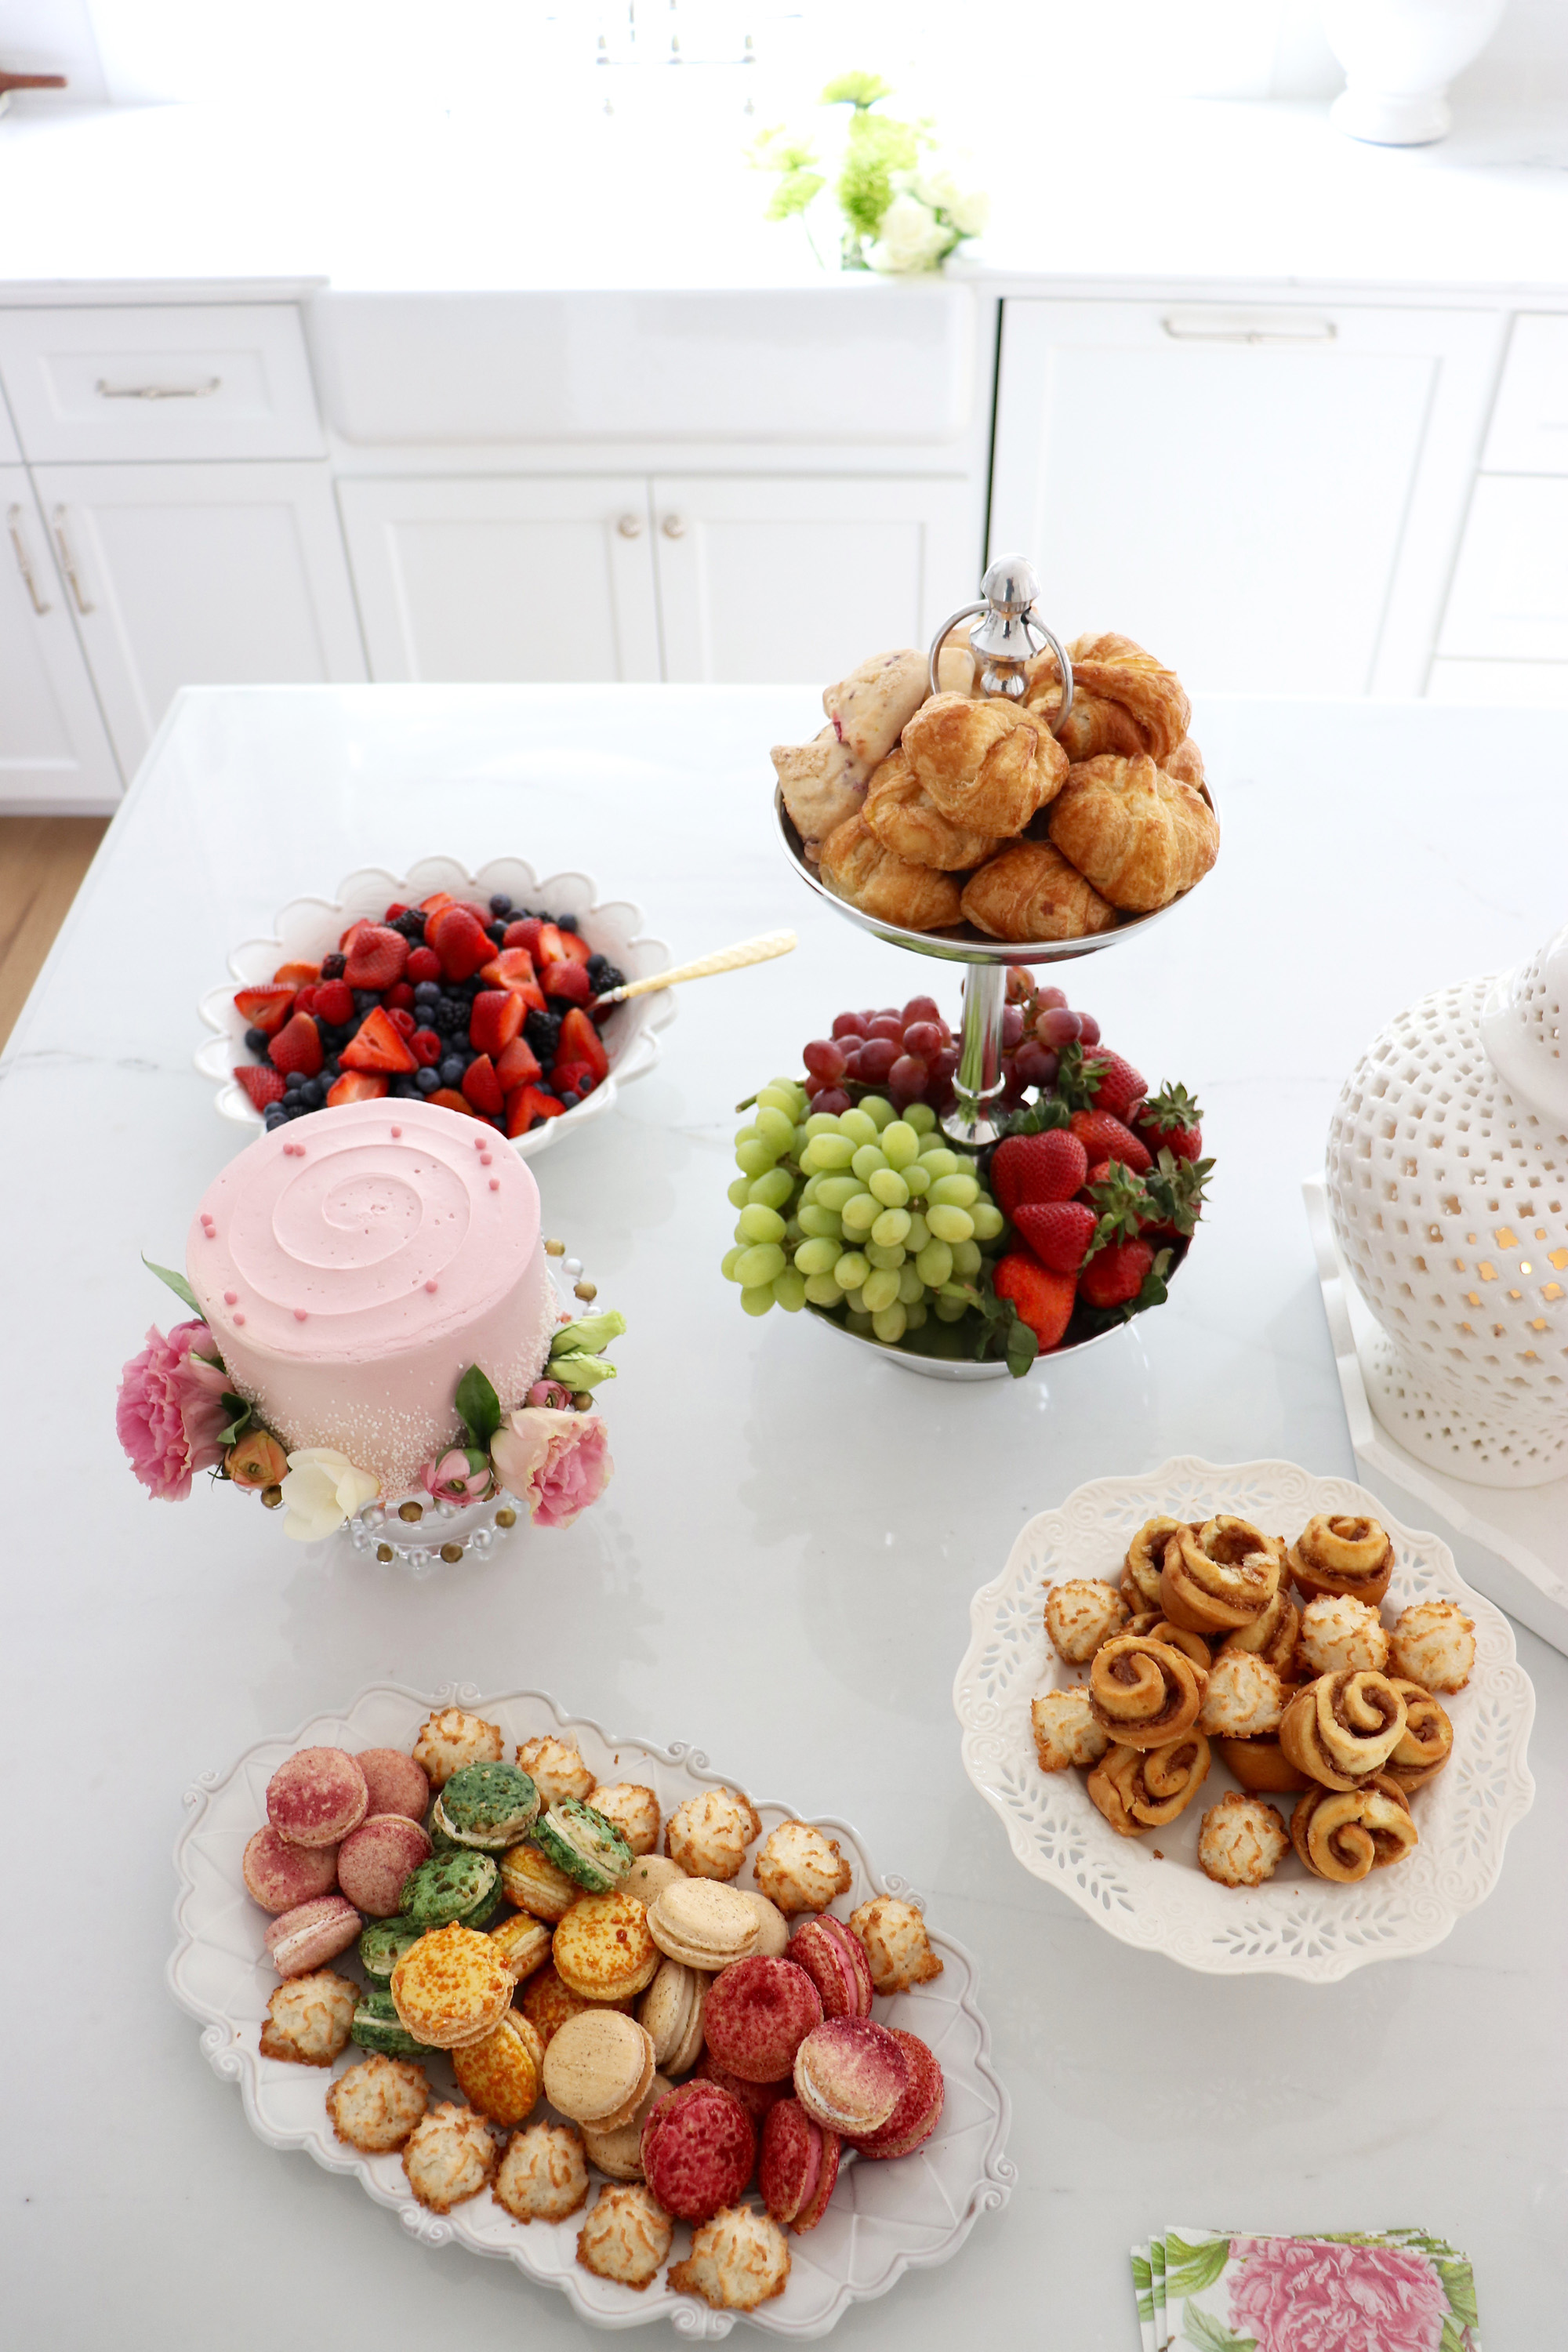 How To Create a Beautiful Spring Brunch Tablescape